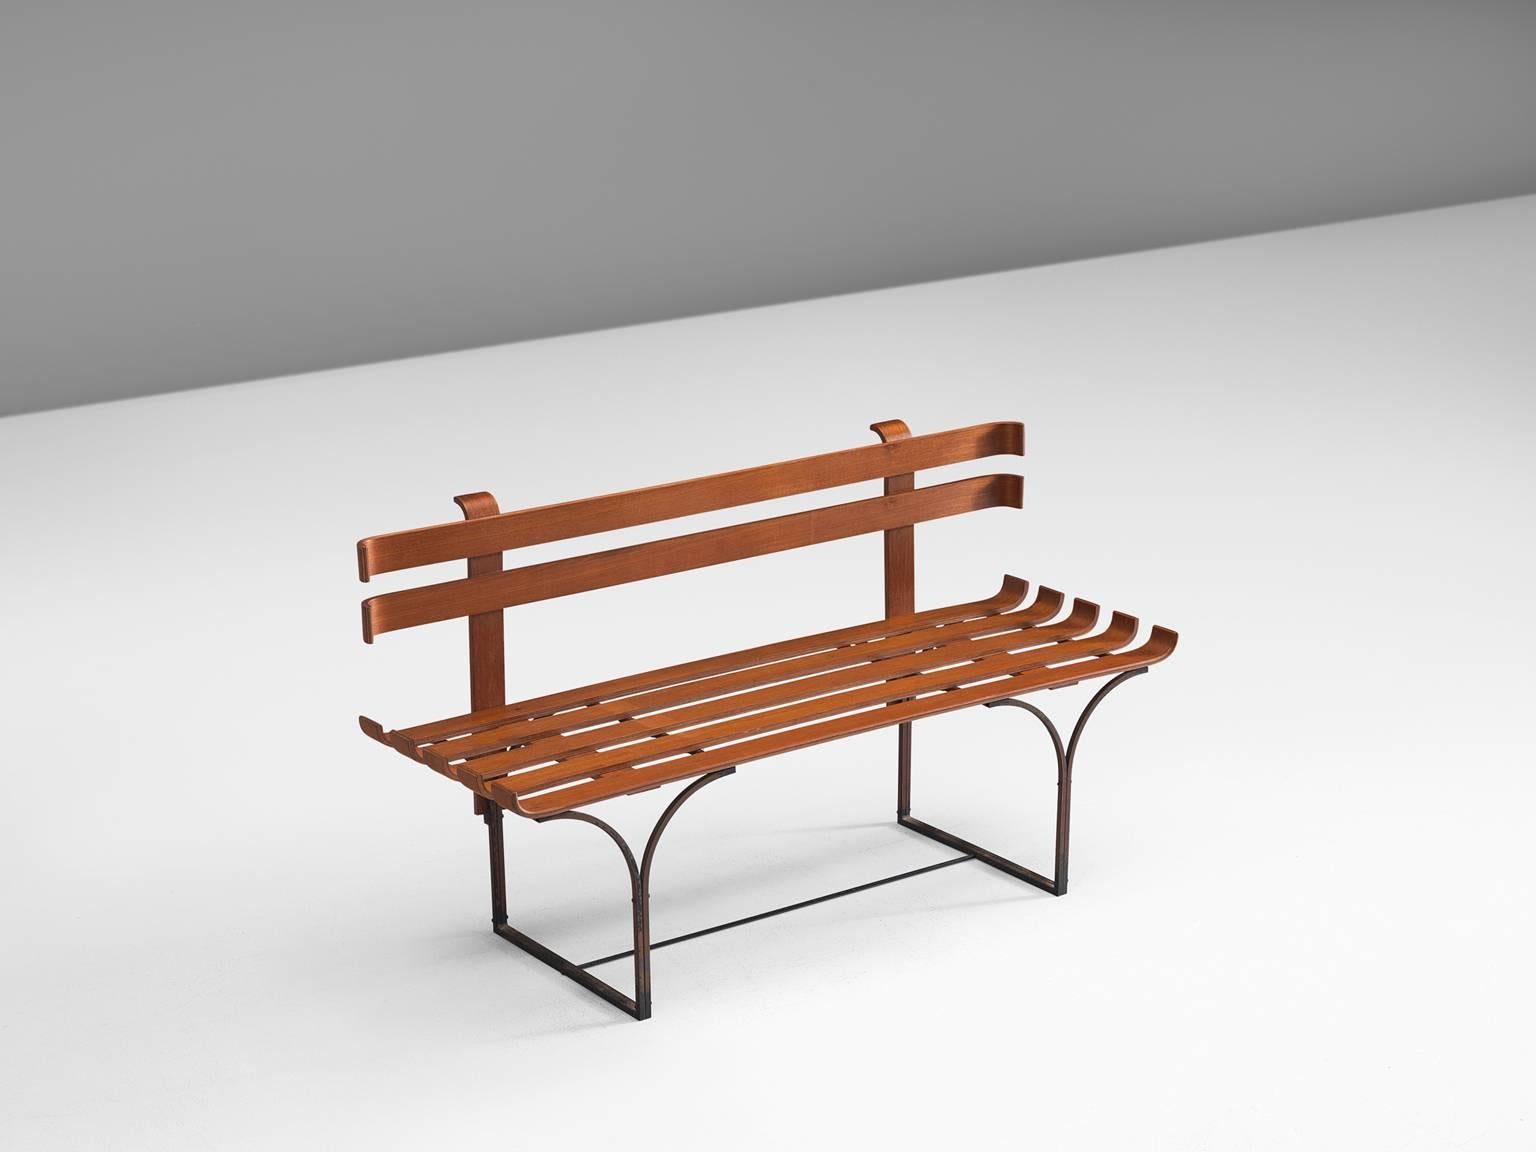 Plywood bench on metal base, Italy, 1950s

The bent plywood bench represents characteristic Italian design elements such as the playful lines of the bent frame and the typical basic design of the plywood. The overall effect of the bench is decidedly